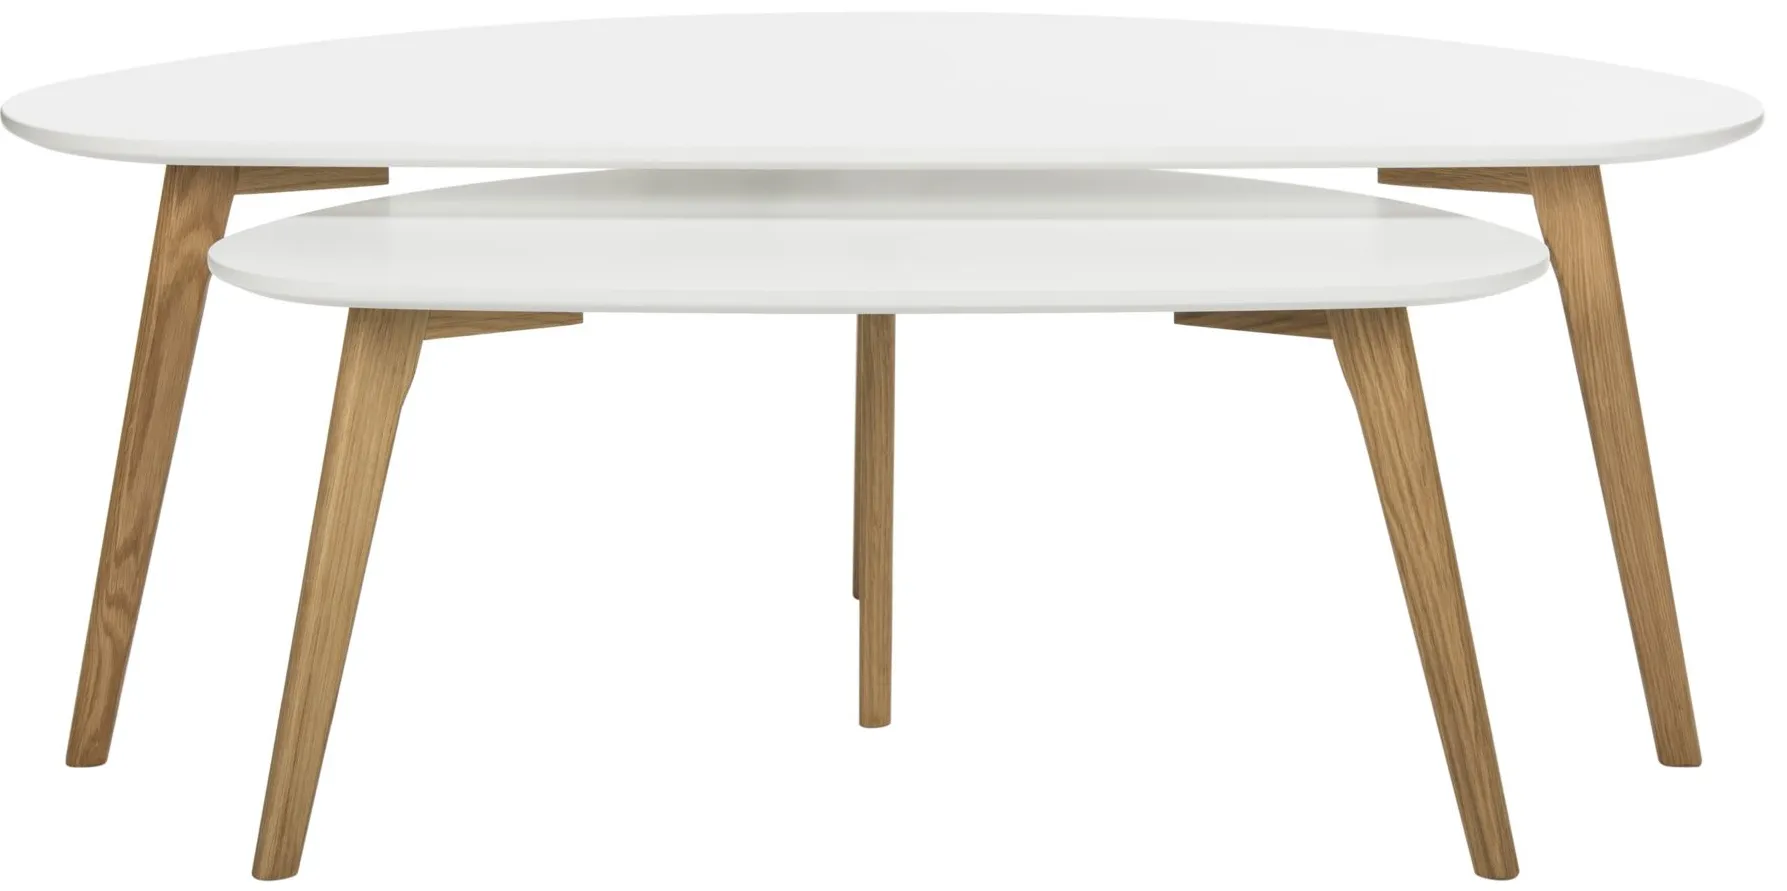 Carmen Double Coffee Table in White by Safavieh